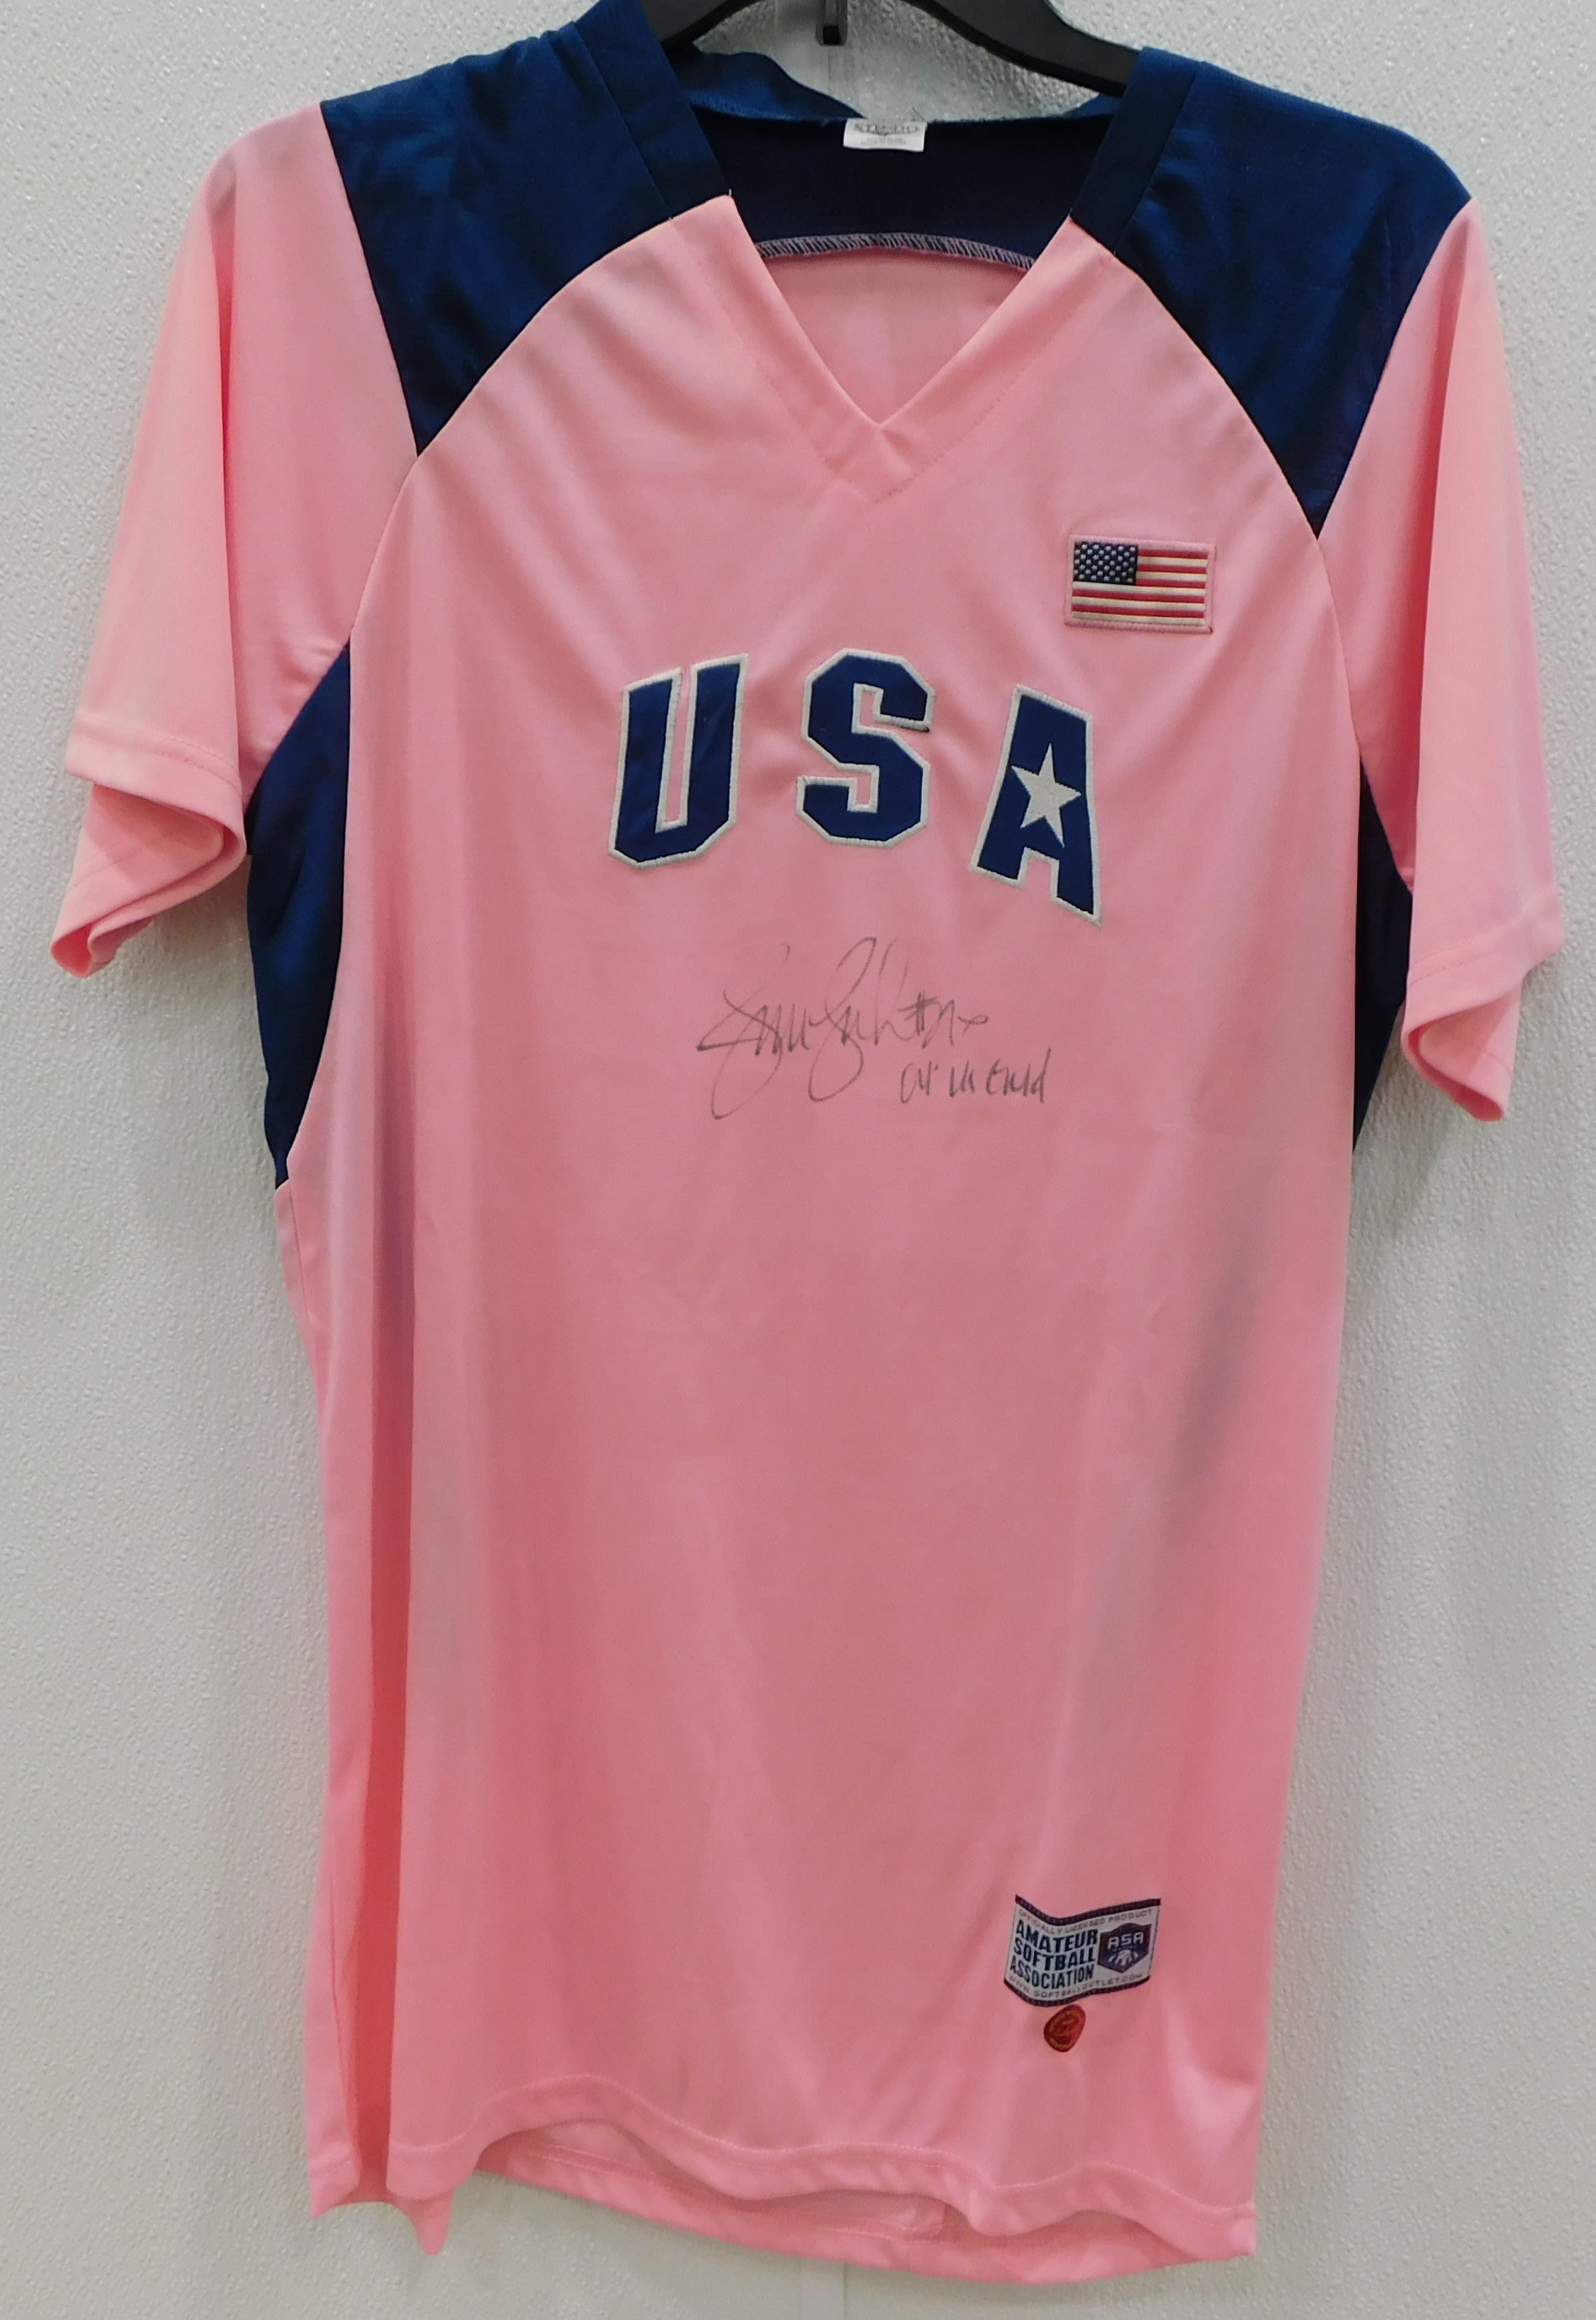 Autographed Jersey - Jennie Finch USA Jersey 2 (Red or Blue option